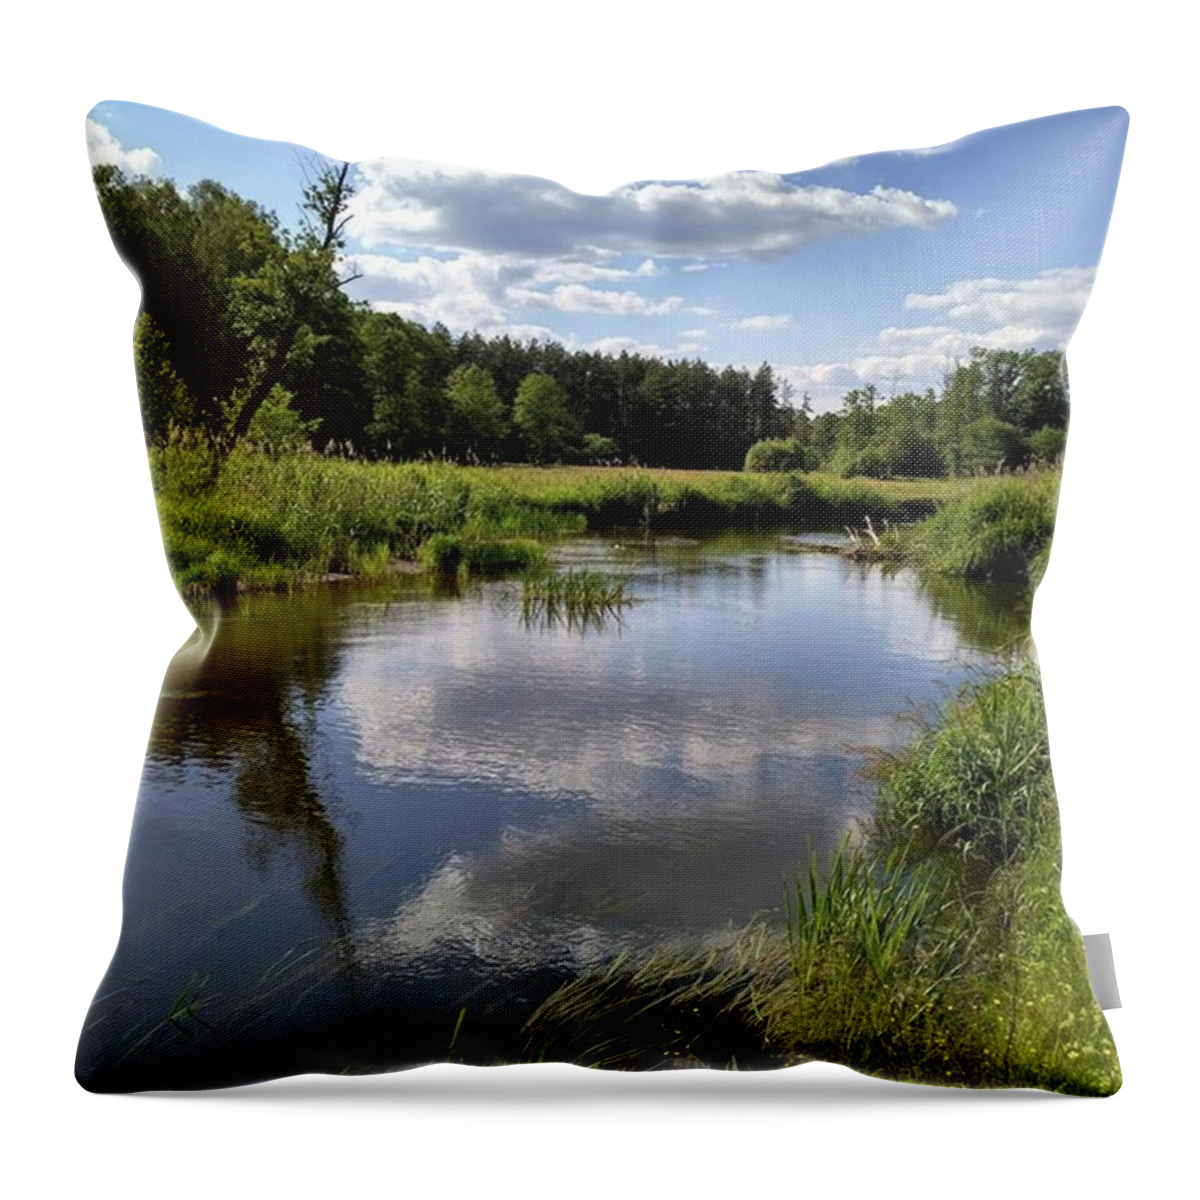 Poland Throw Pillow featuring the photograph It's So Calming Here In Odrzywol by Arletta Cwalina